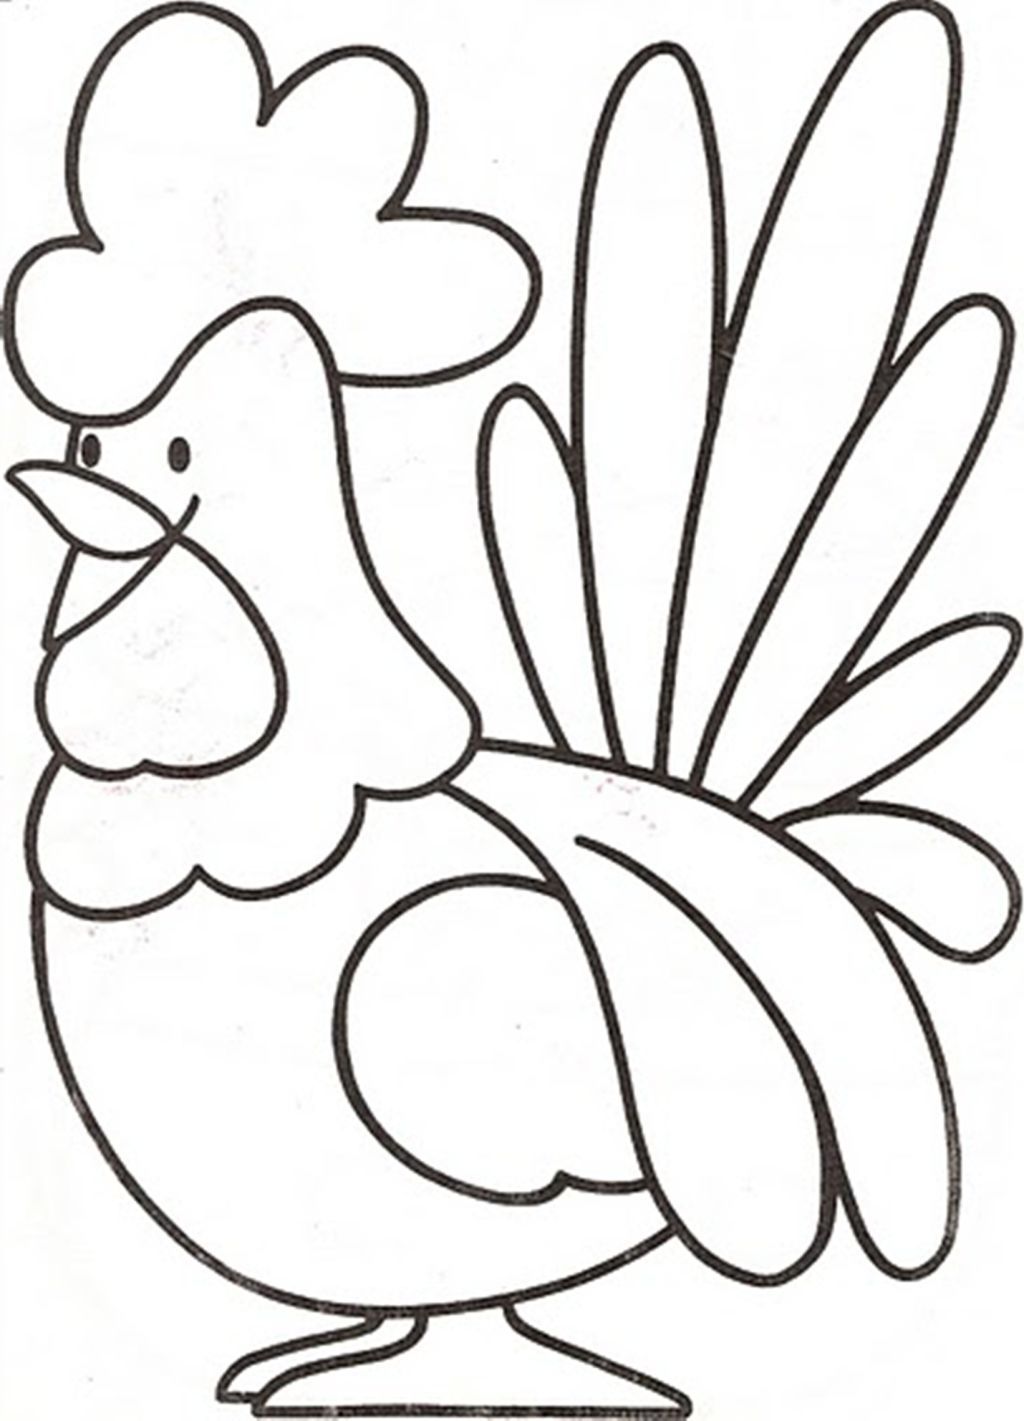 Rooster Coloring Page #2695